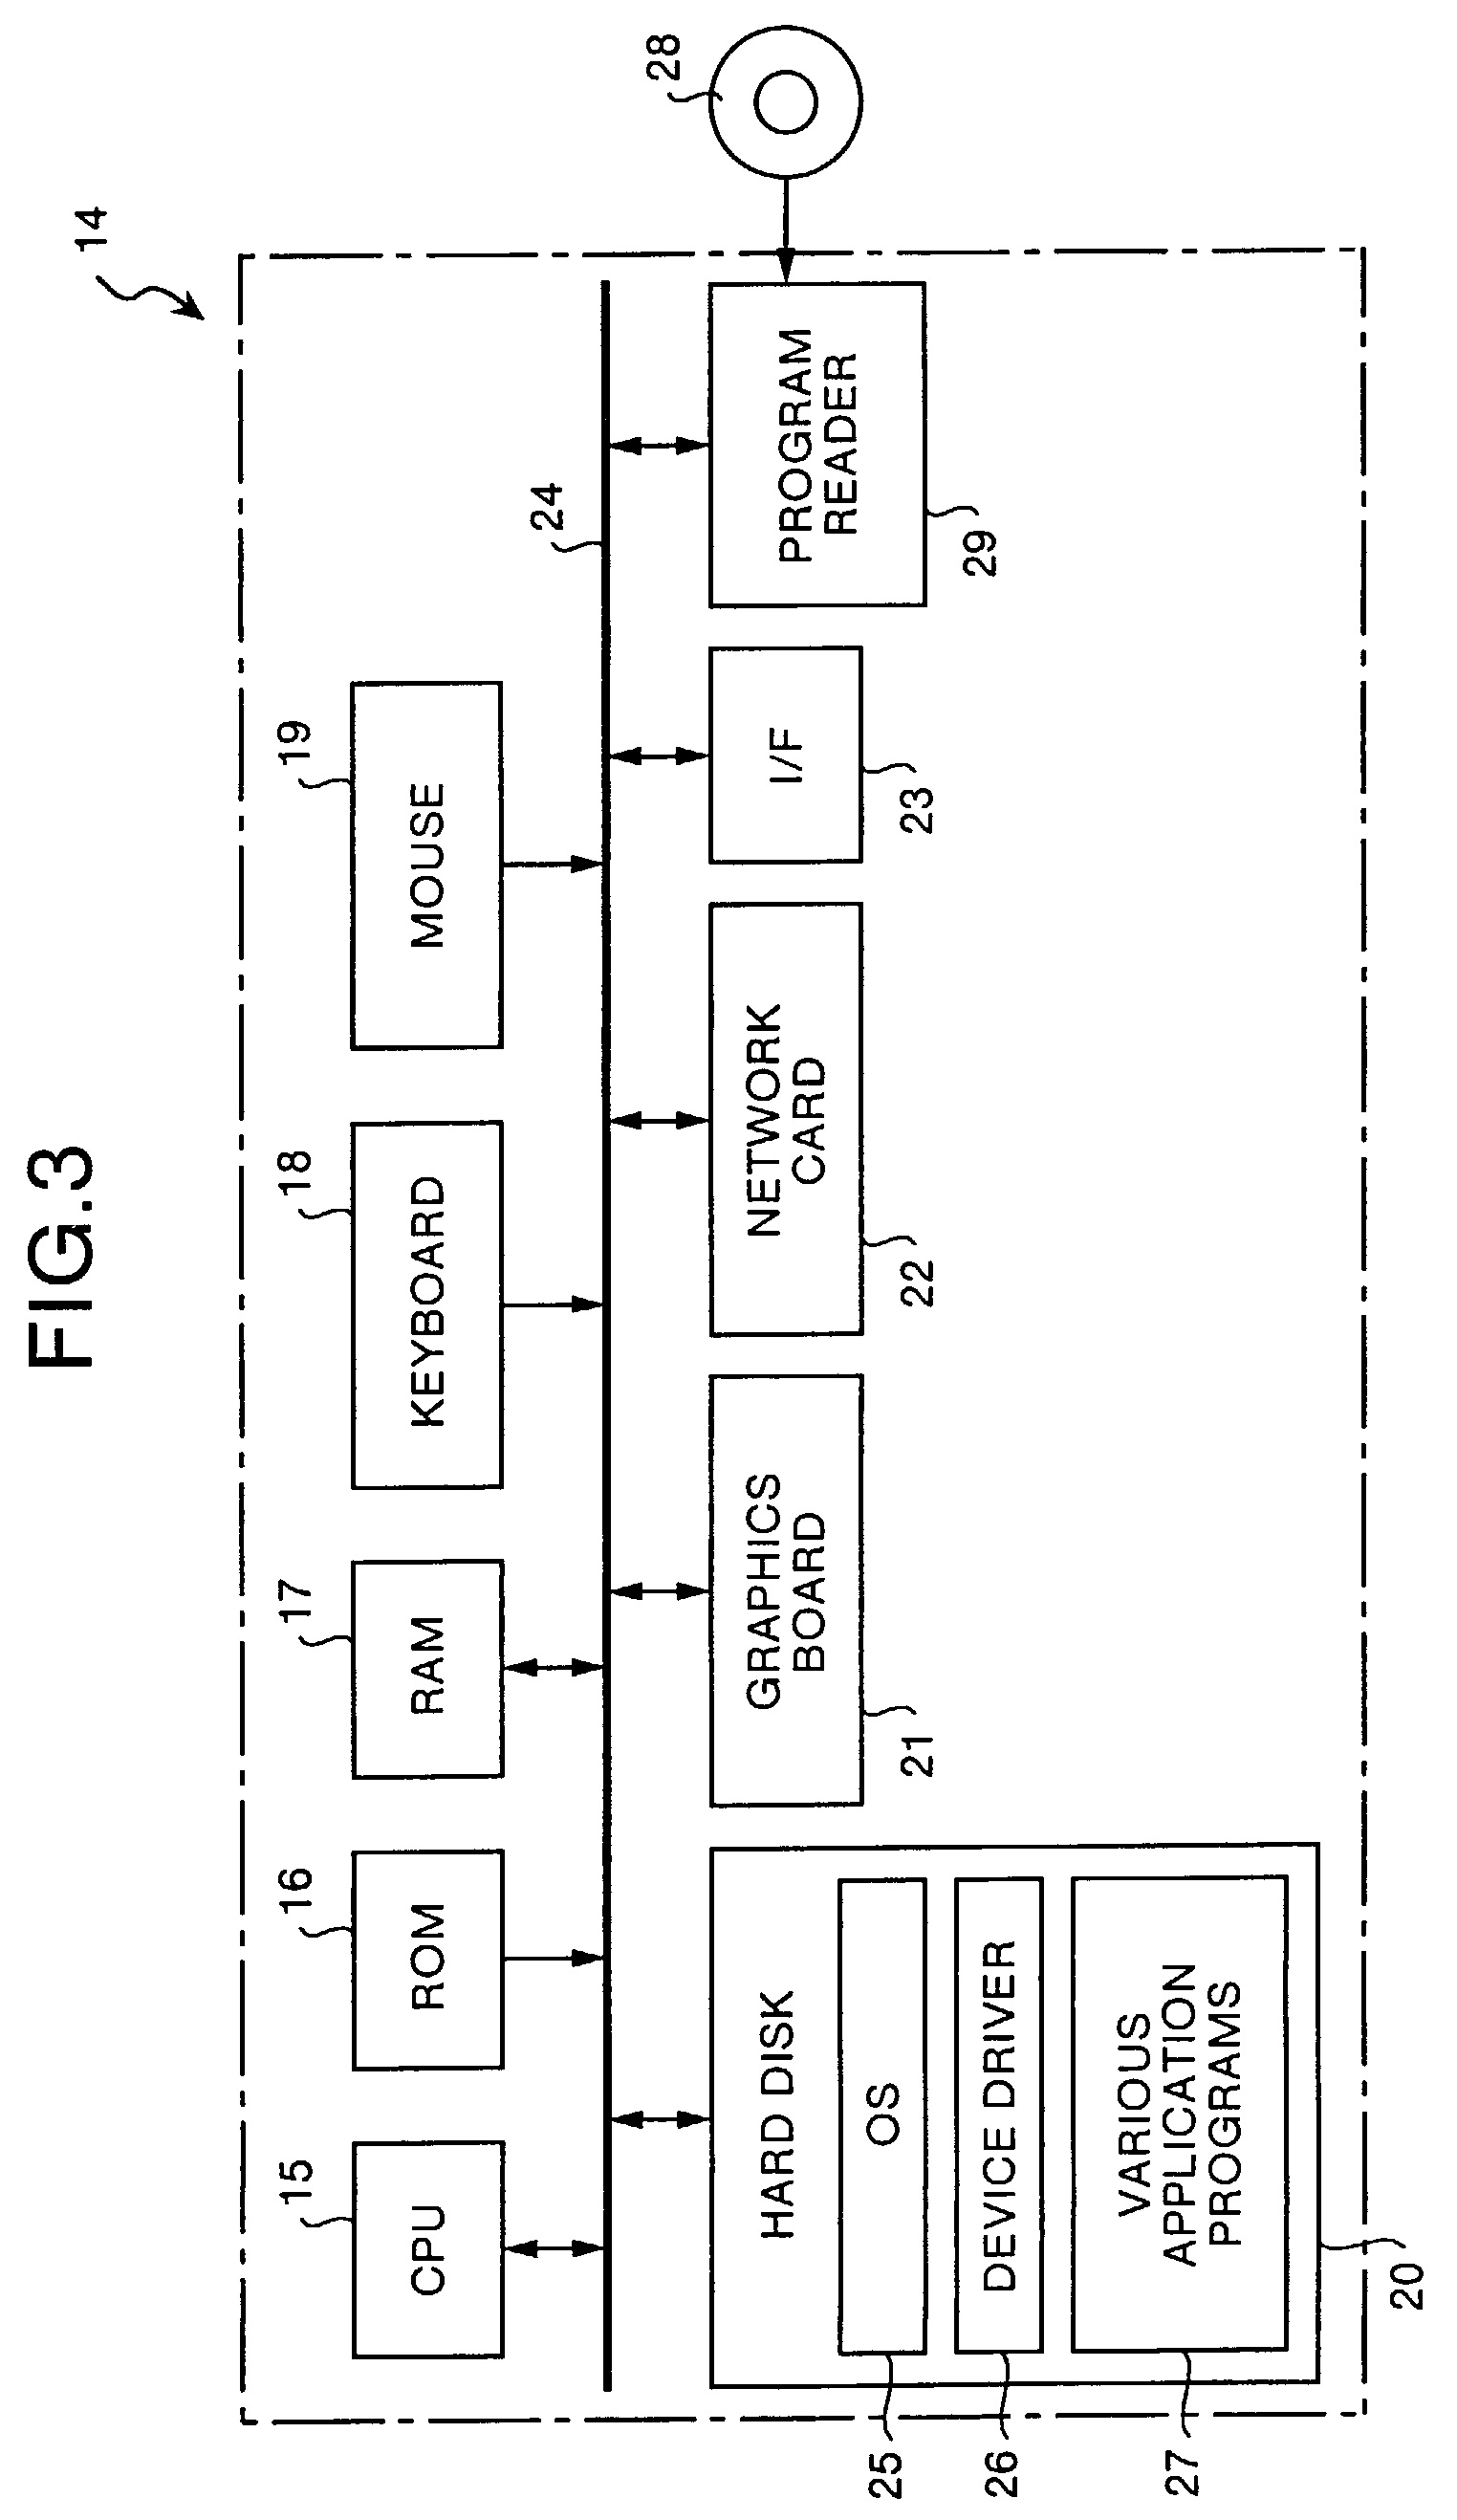 Conference support apparatus, information processor, teleconference system and computer product